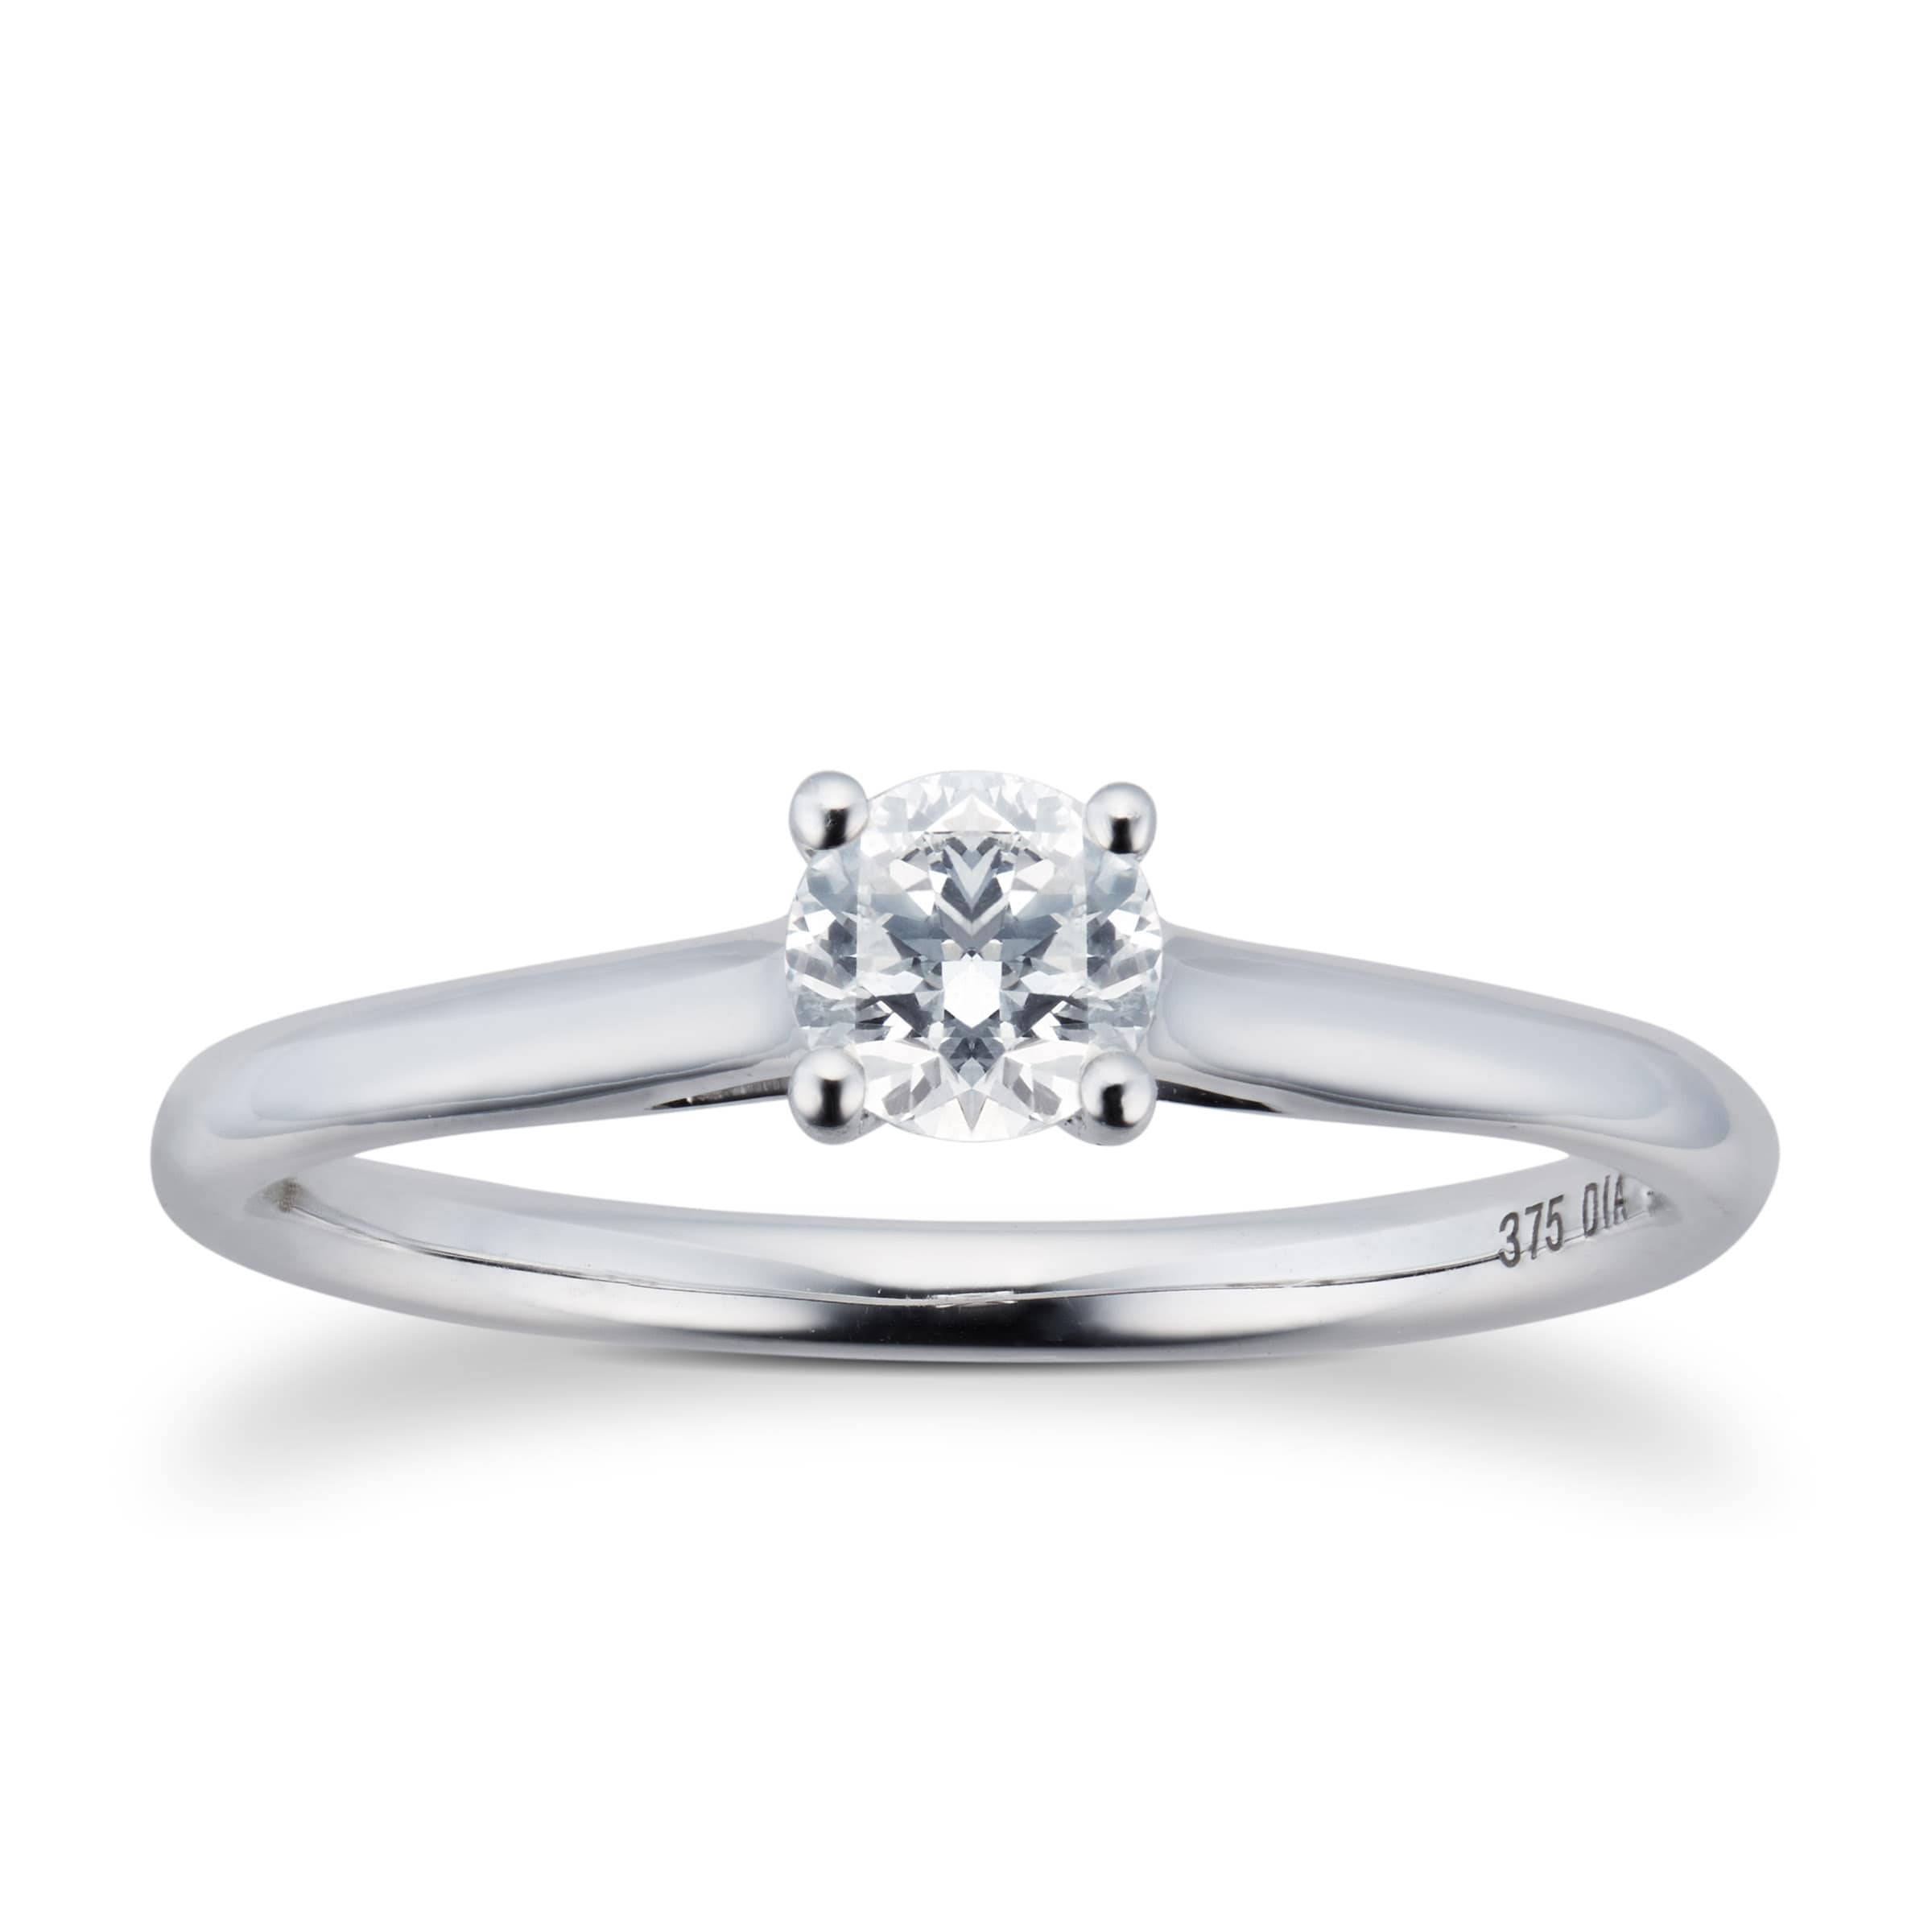 Brilliant Cut 033ct 4 Claw Diamond Solitaire Ring In 9ct White Gold Ring Size O